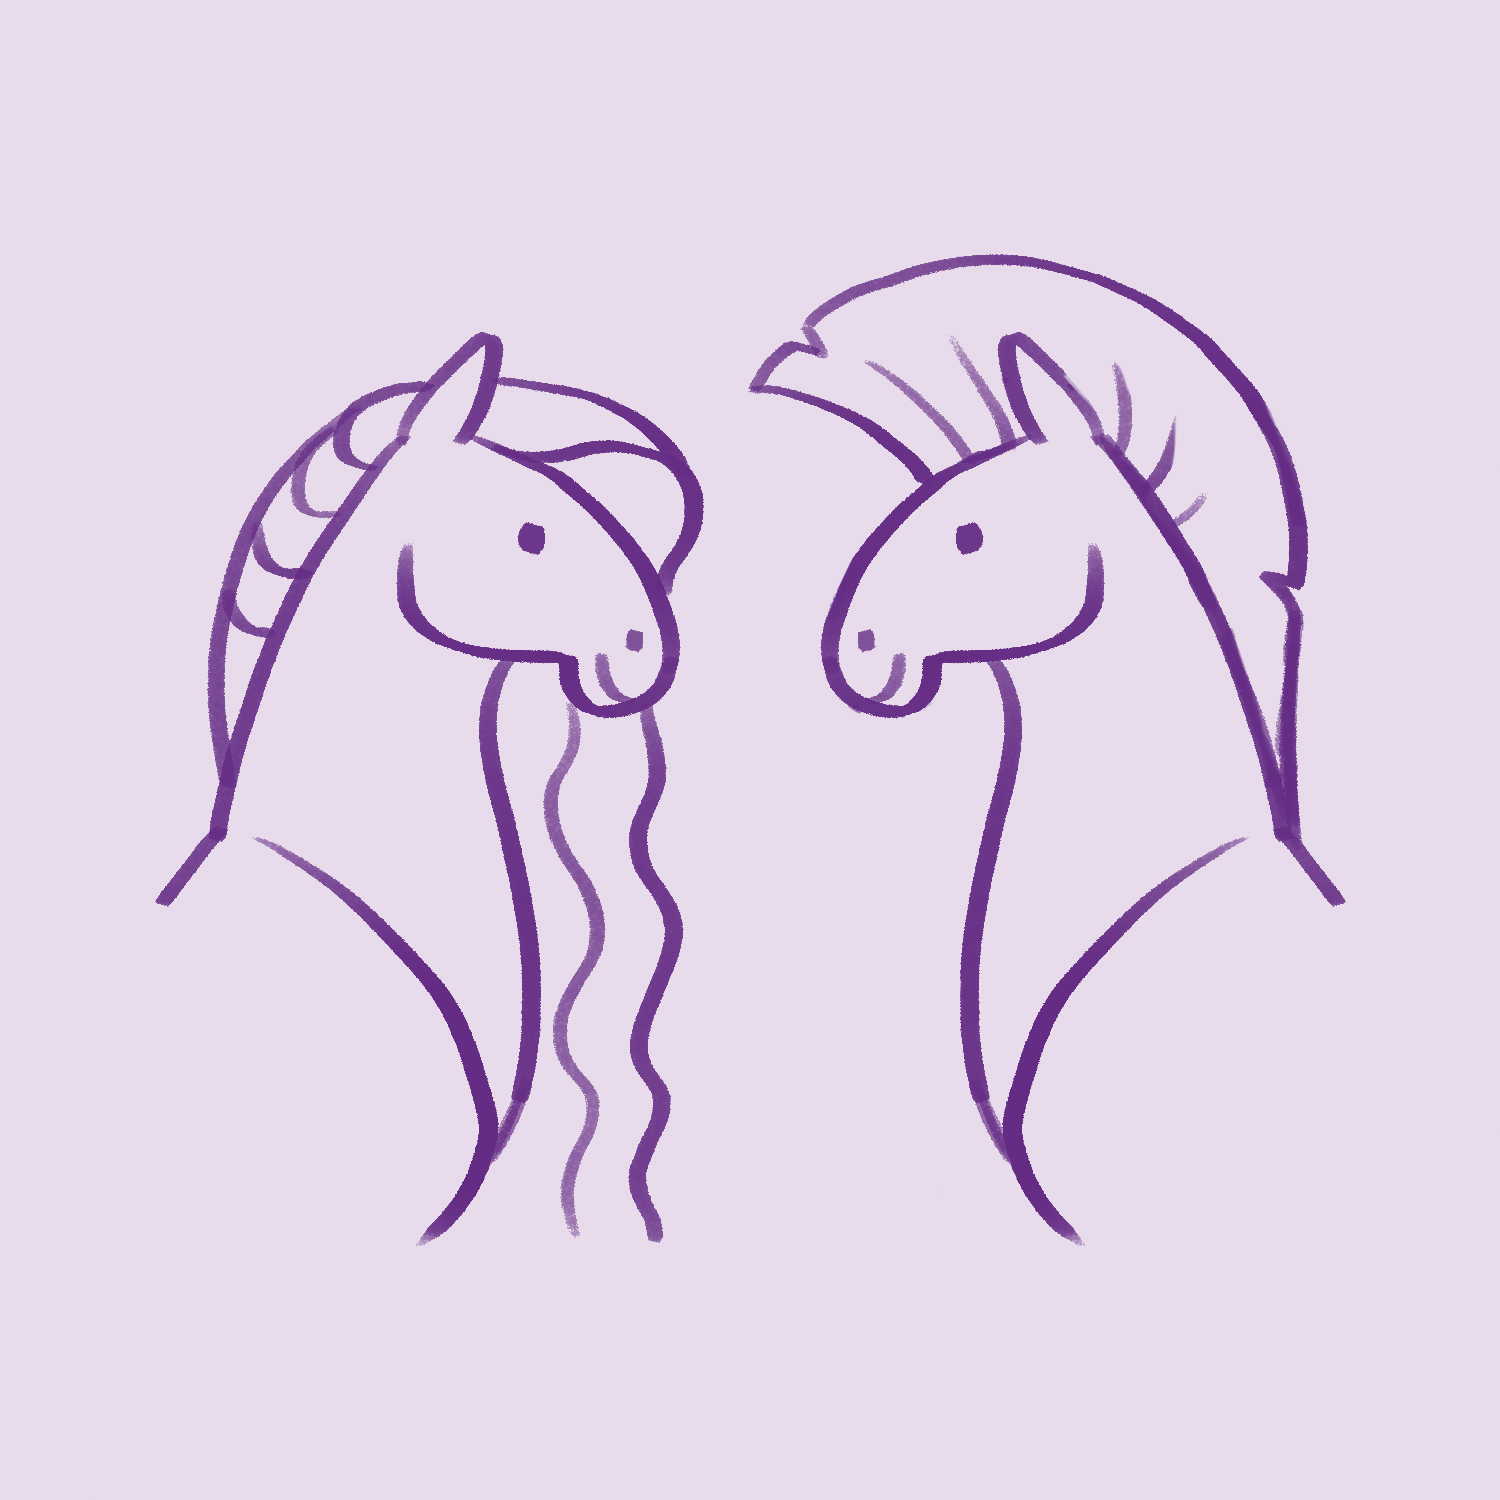 An illustration of two horses facing each other in an interview.